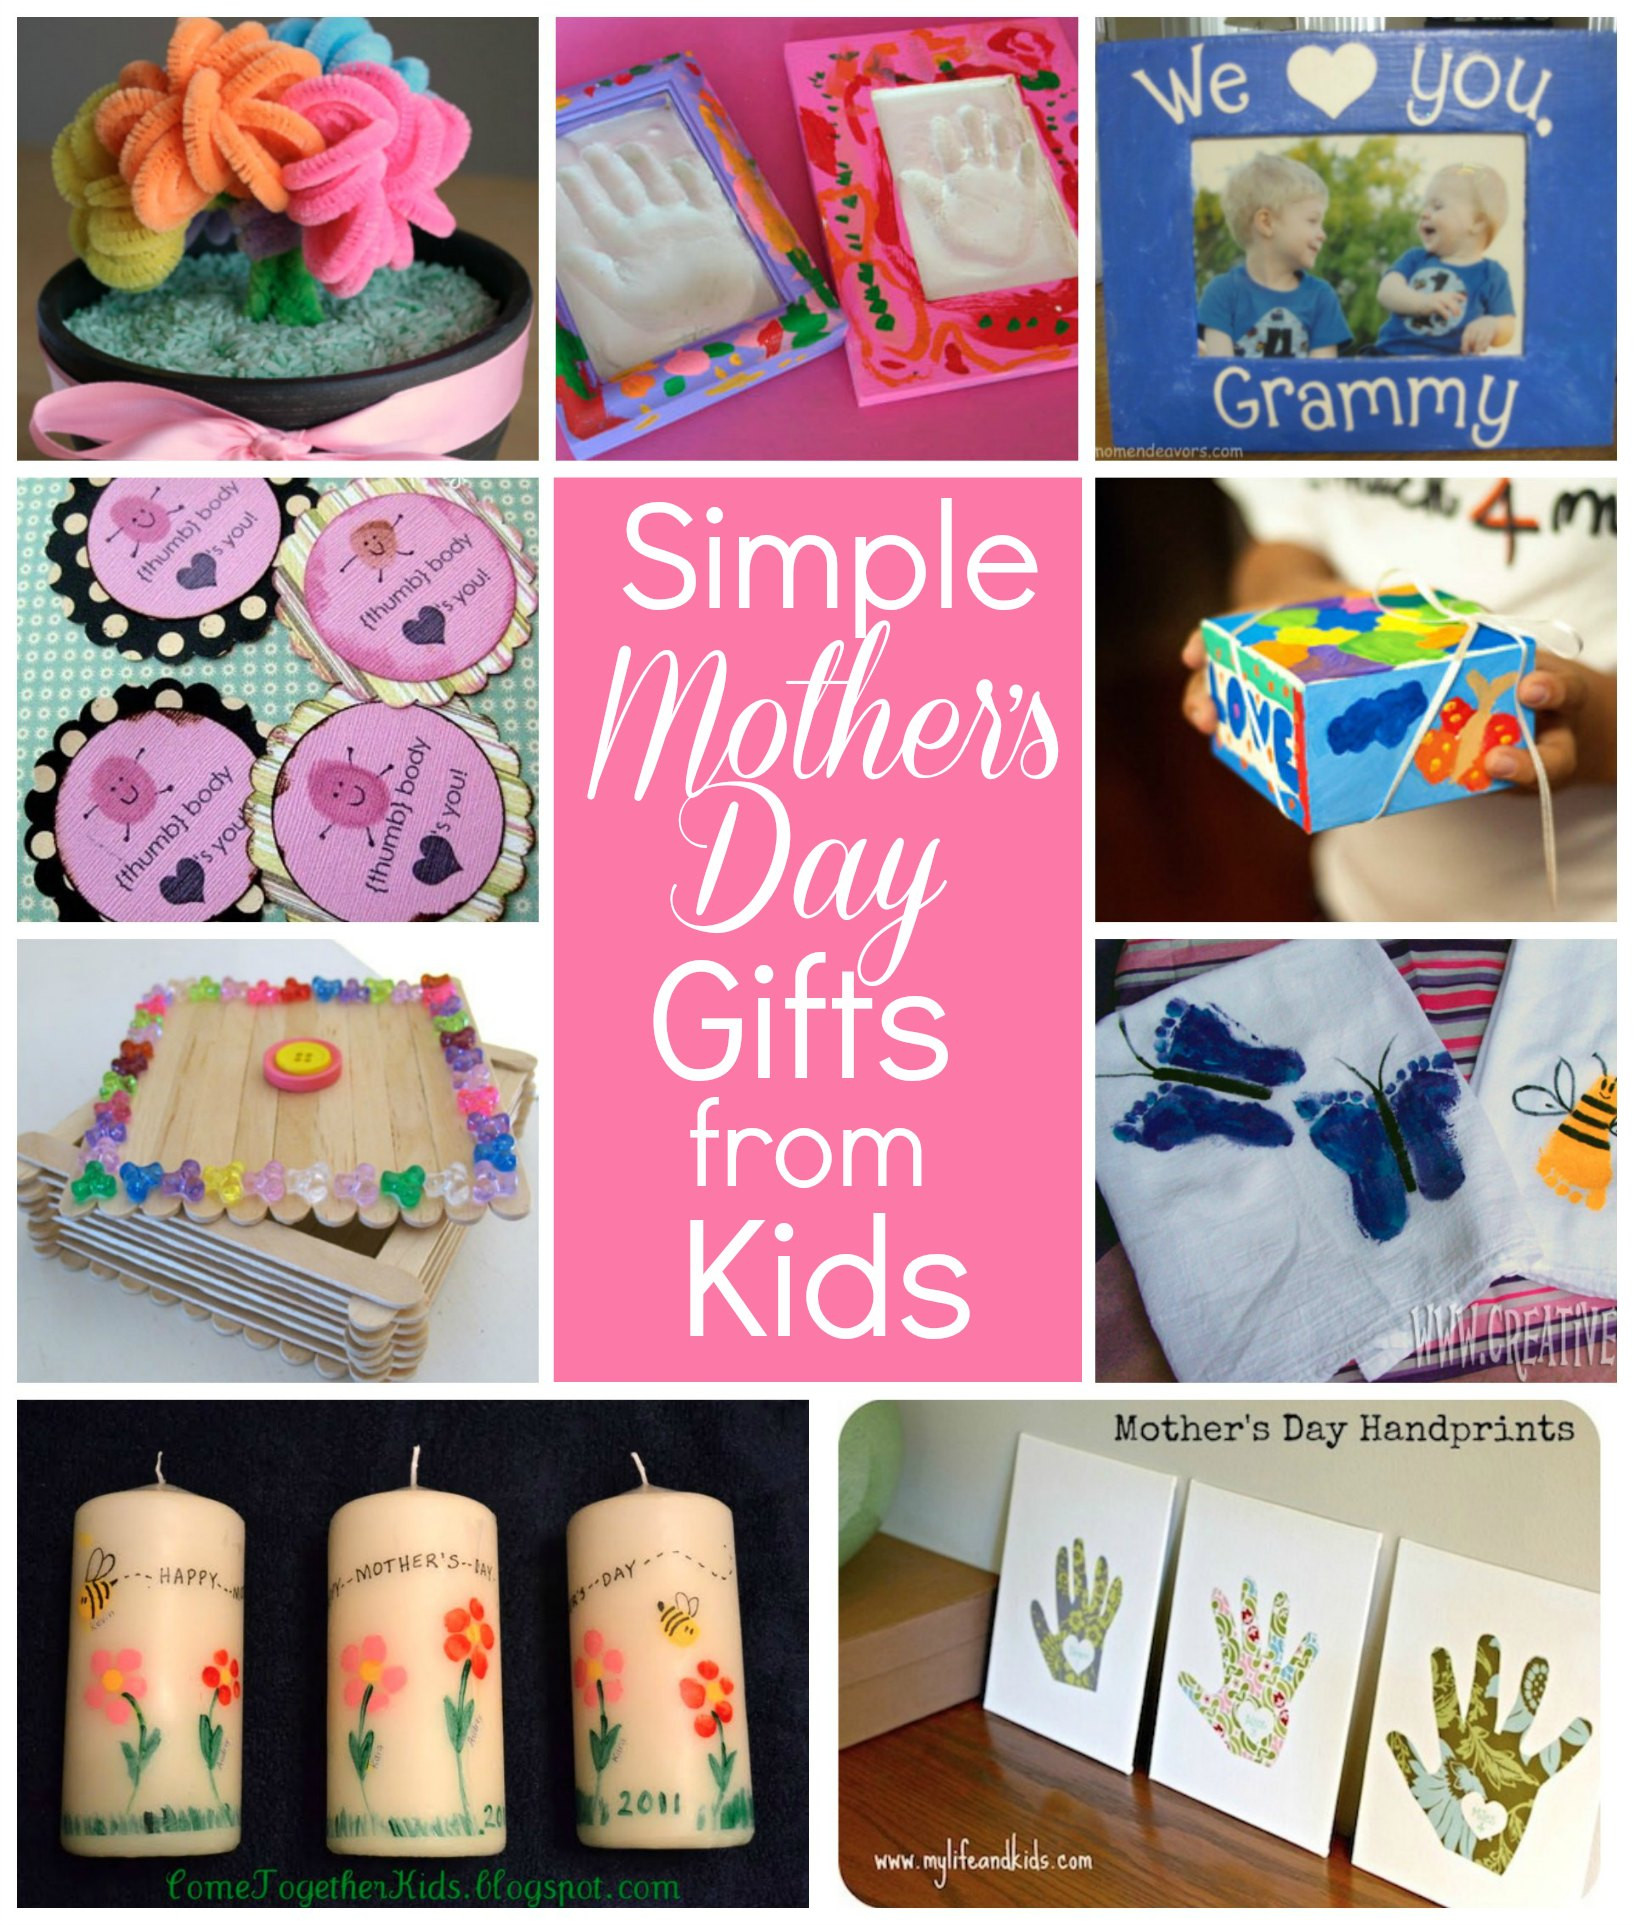 Mothers Day Gifts Ideas To Make
 Simple Mother’s Day t ideas for grandma Flower pot